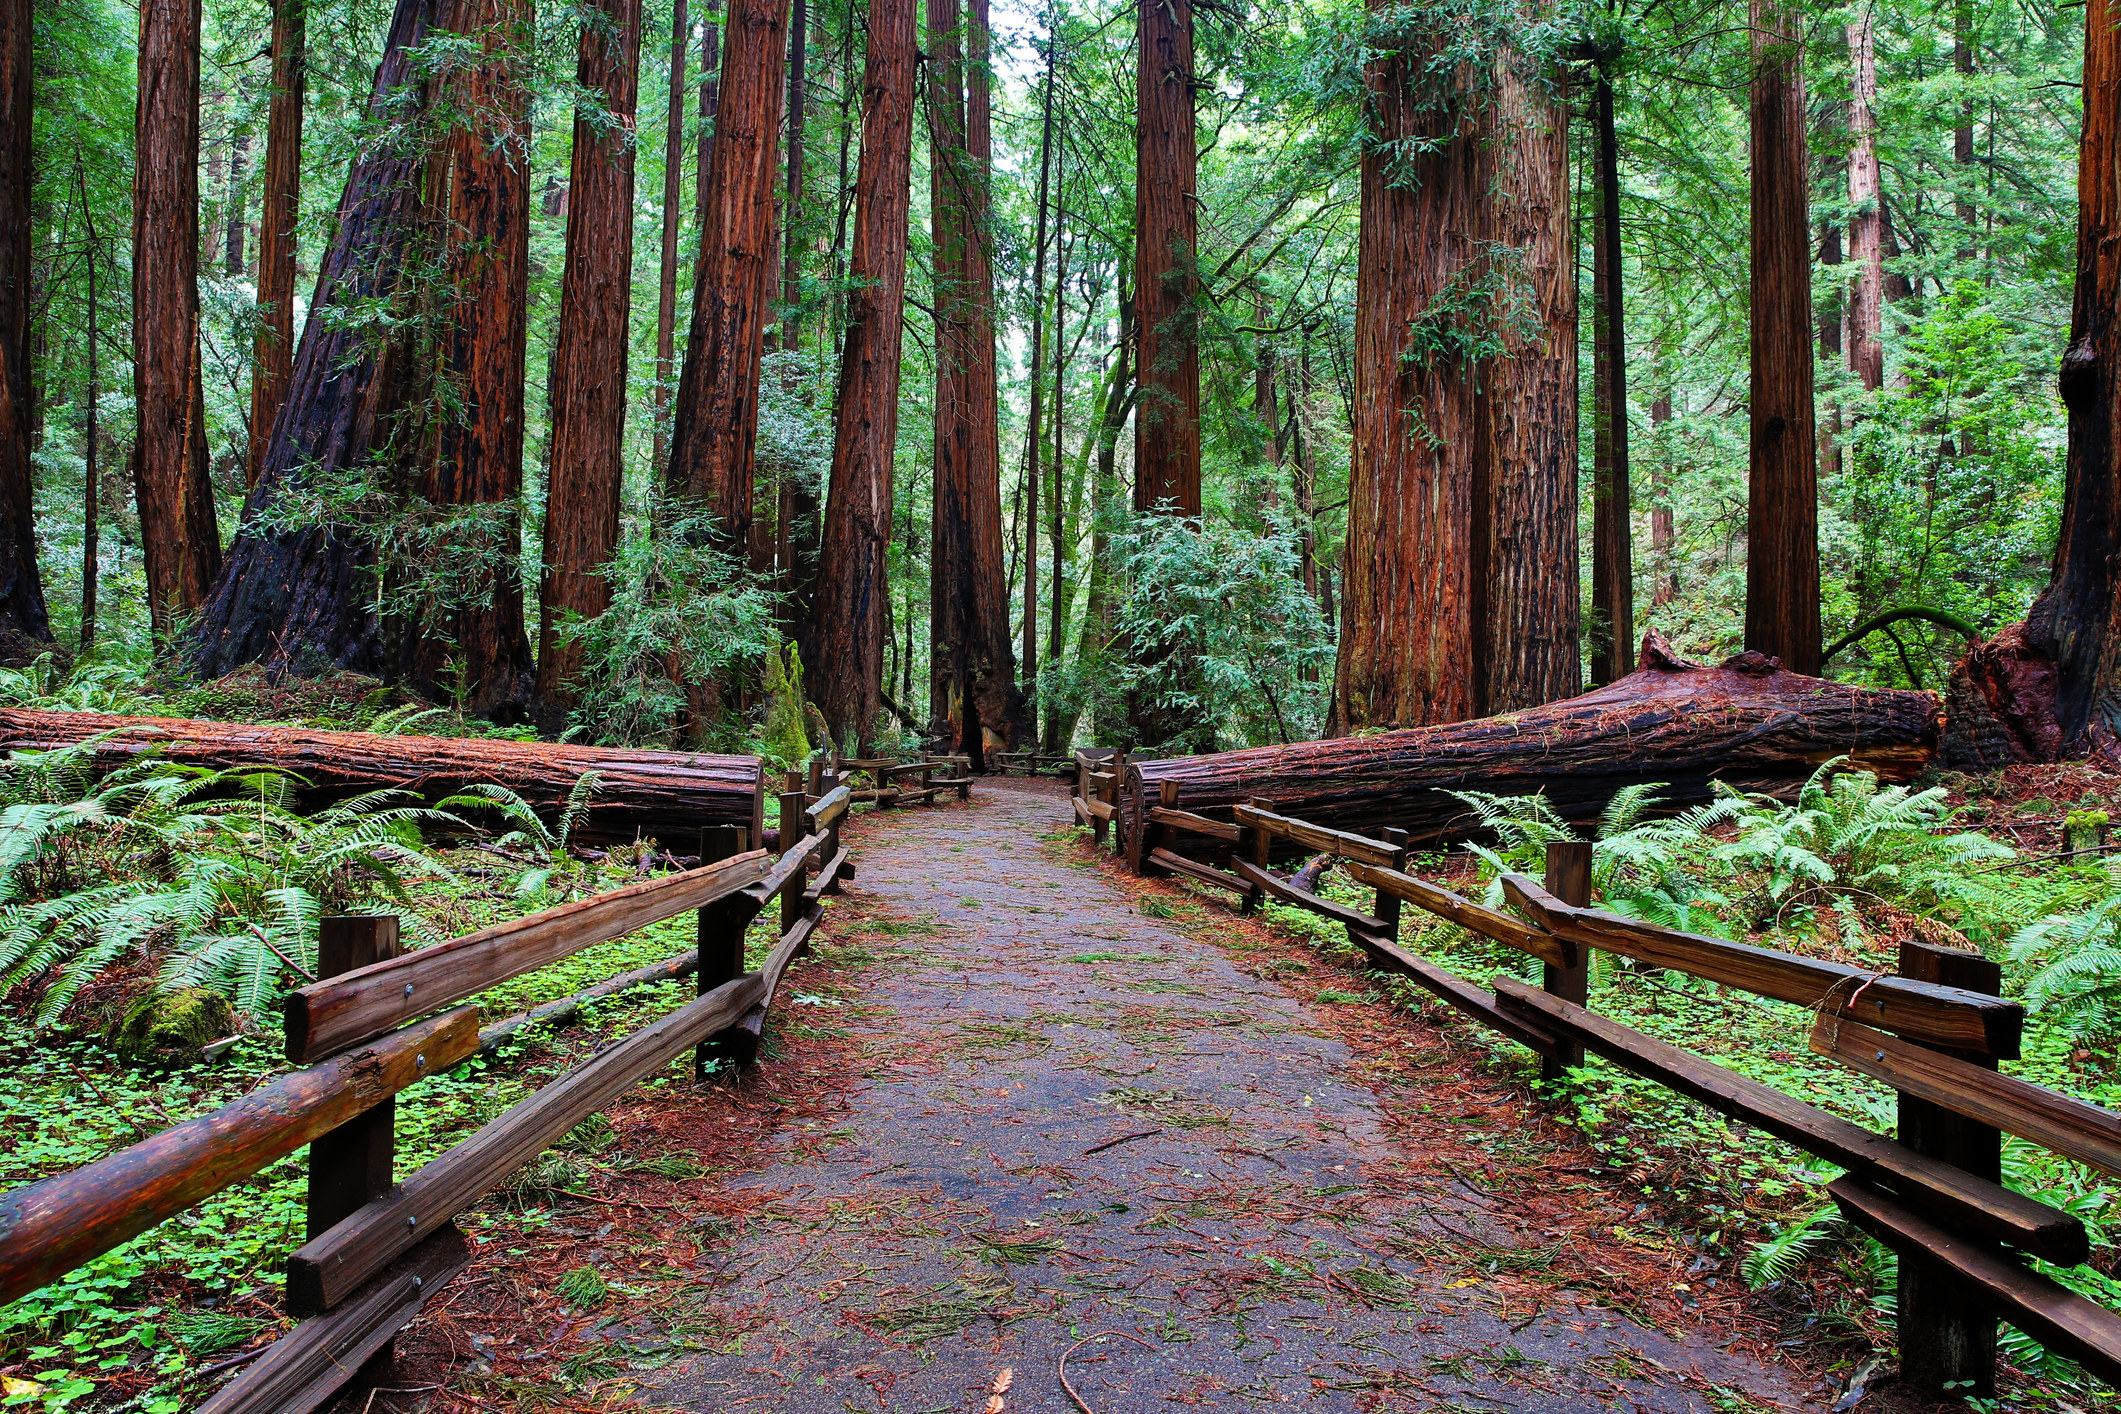 A walkway surrounded by towering redwood trees.